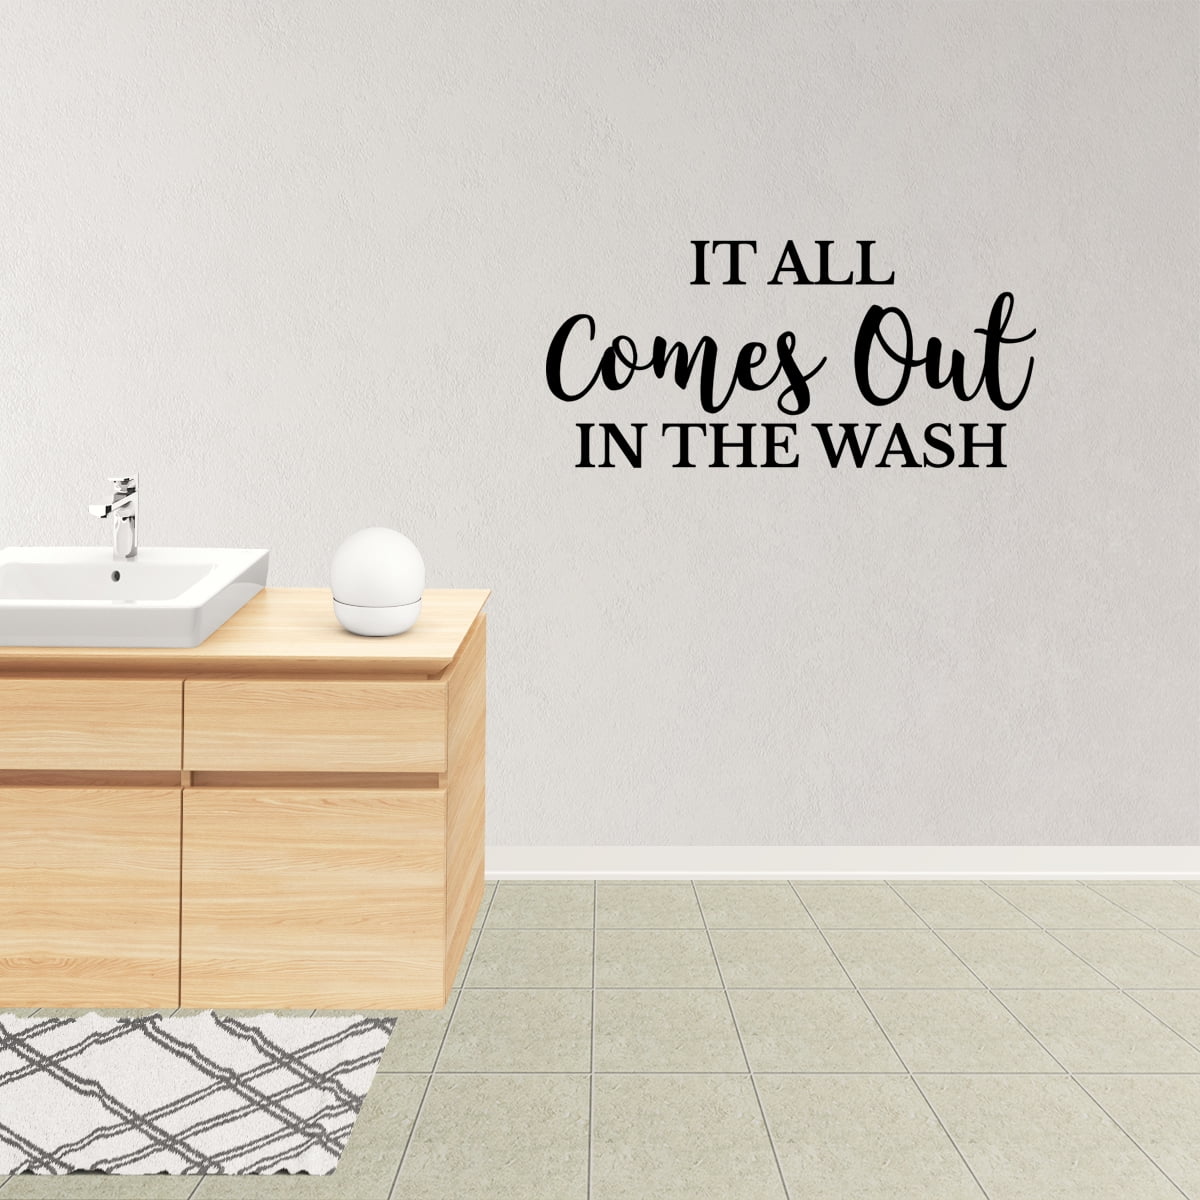 IT ALL COMES OUT IN THE WASH  WALL QUOTE DECAL VINYL WORDS LAUNDRY LETTERING 